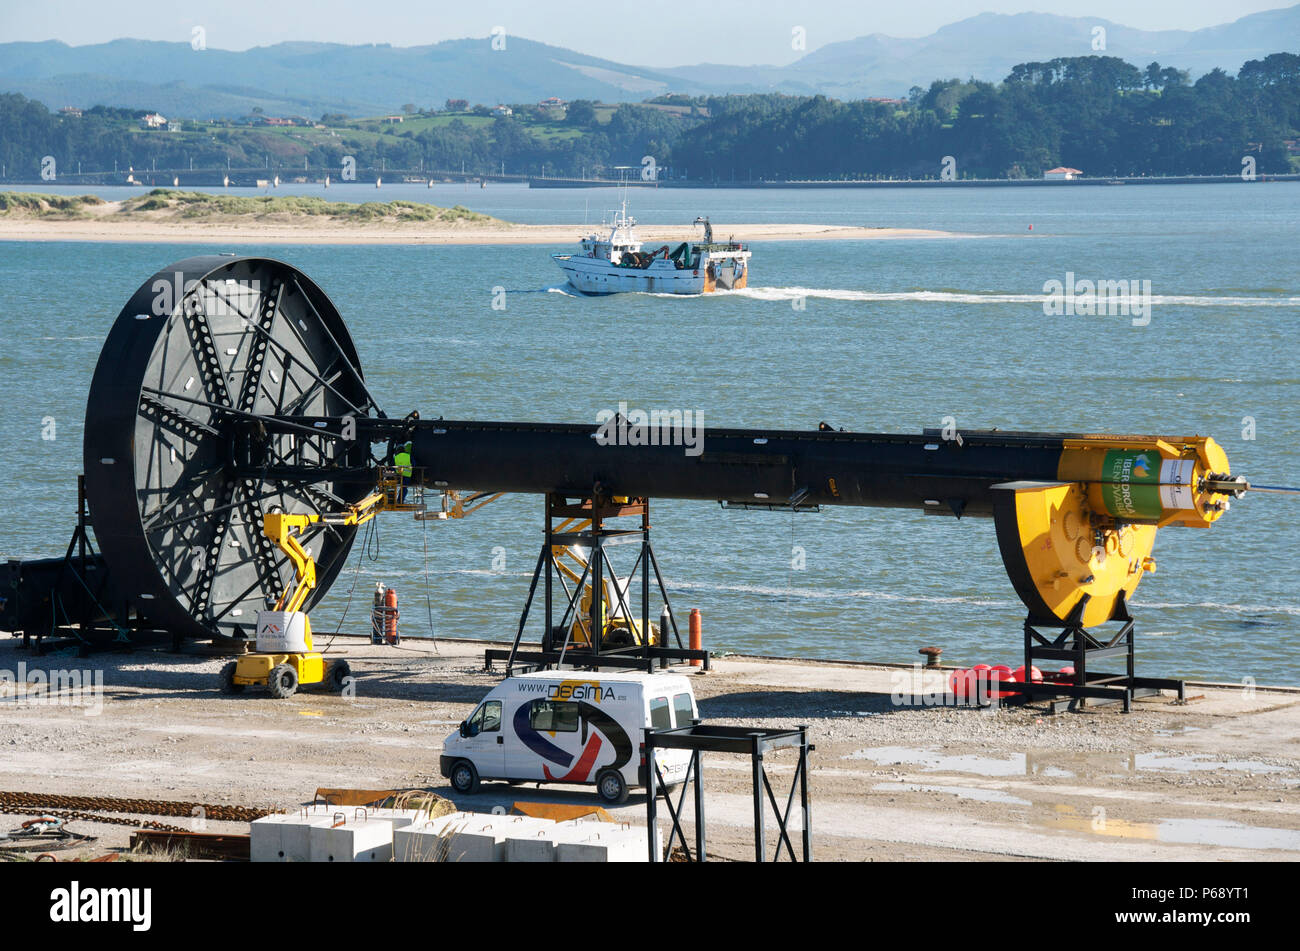 23 October 2008 - Santander, Northern Spain - The first electricity-generating buoy of spanish power company Iberdrola Renovables' future wave-energy  Stock Photo